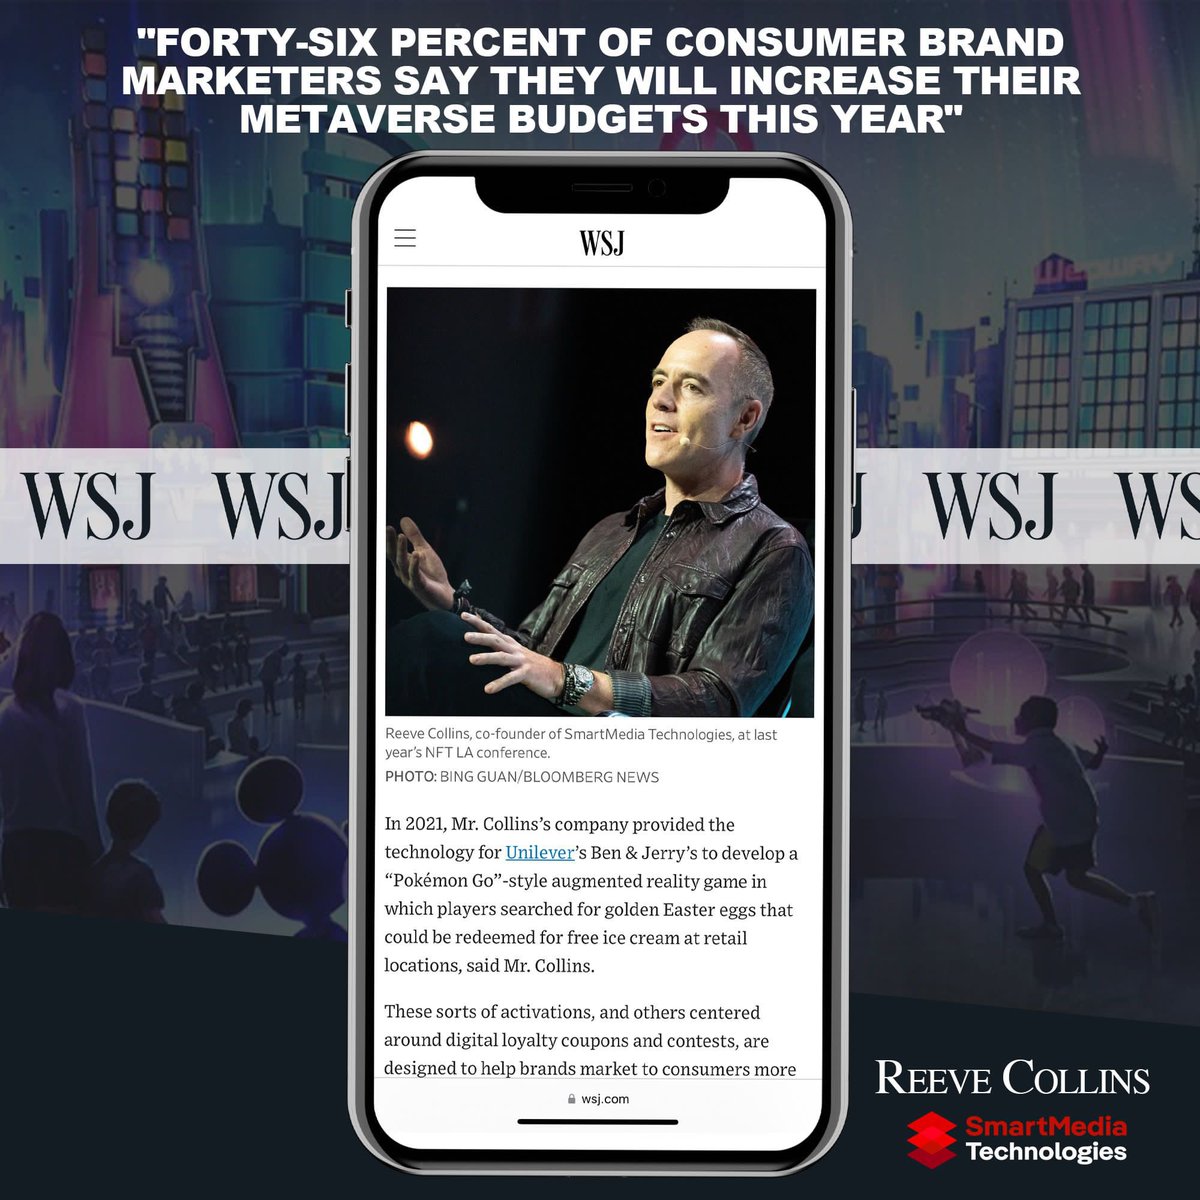 46% of consumer brand marketers say they will increase their metaverse budgets this year #web3 #metaverse #smartnfts @SmartMedia_Tech @WSJ @PatrickCoffee